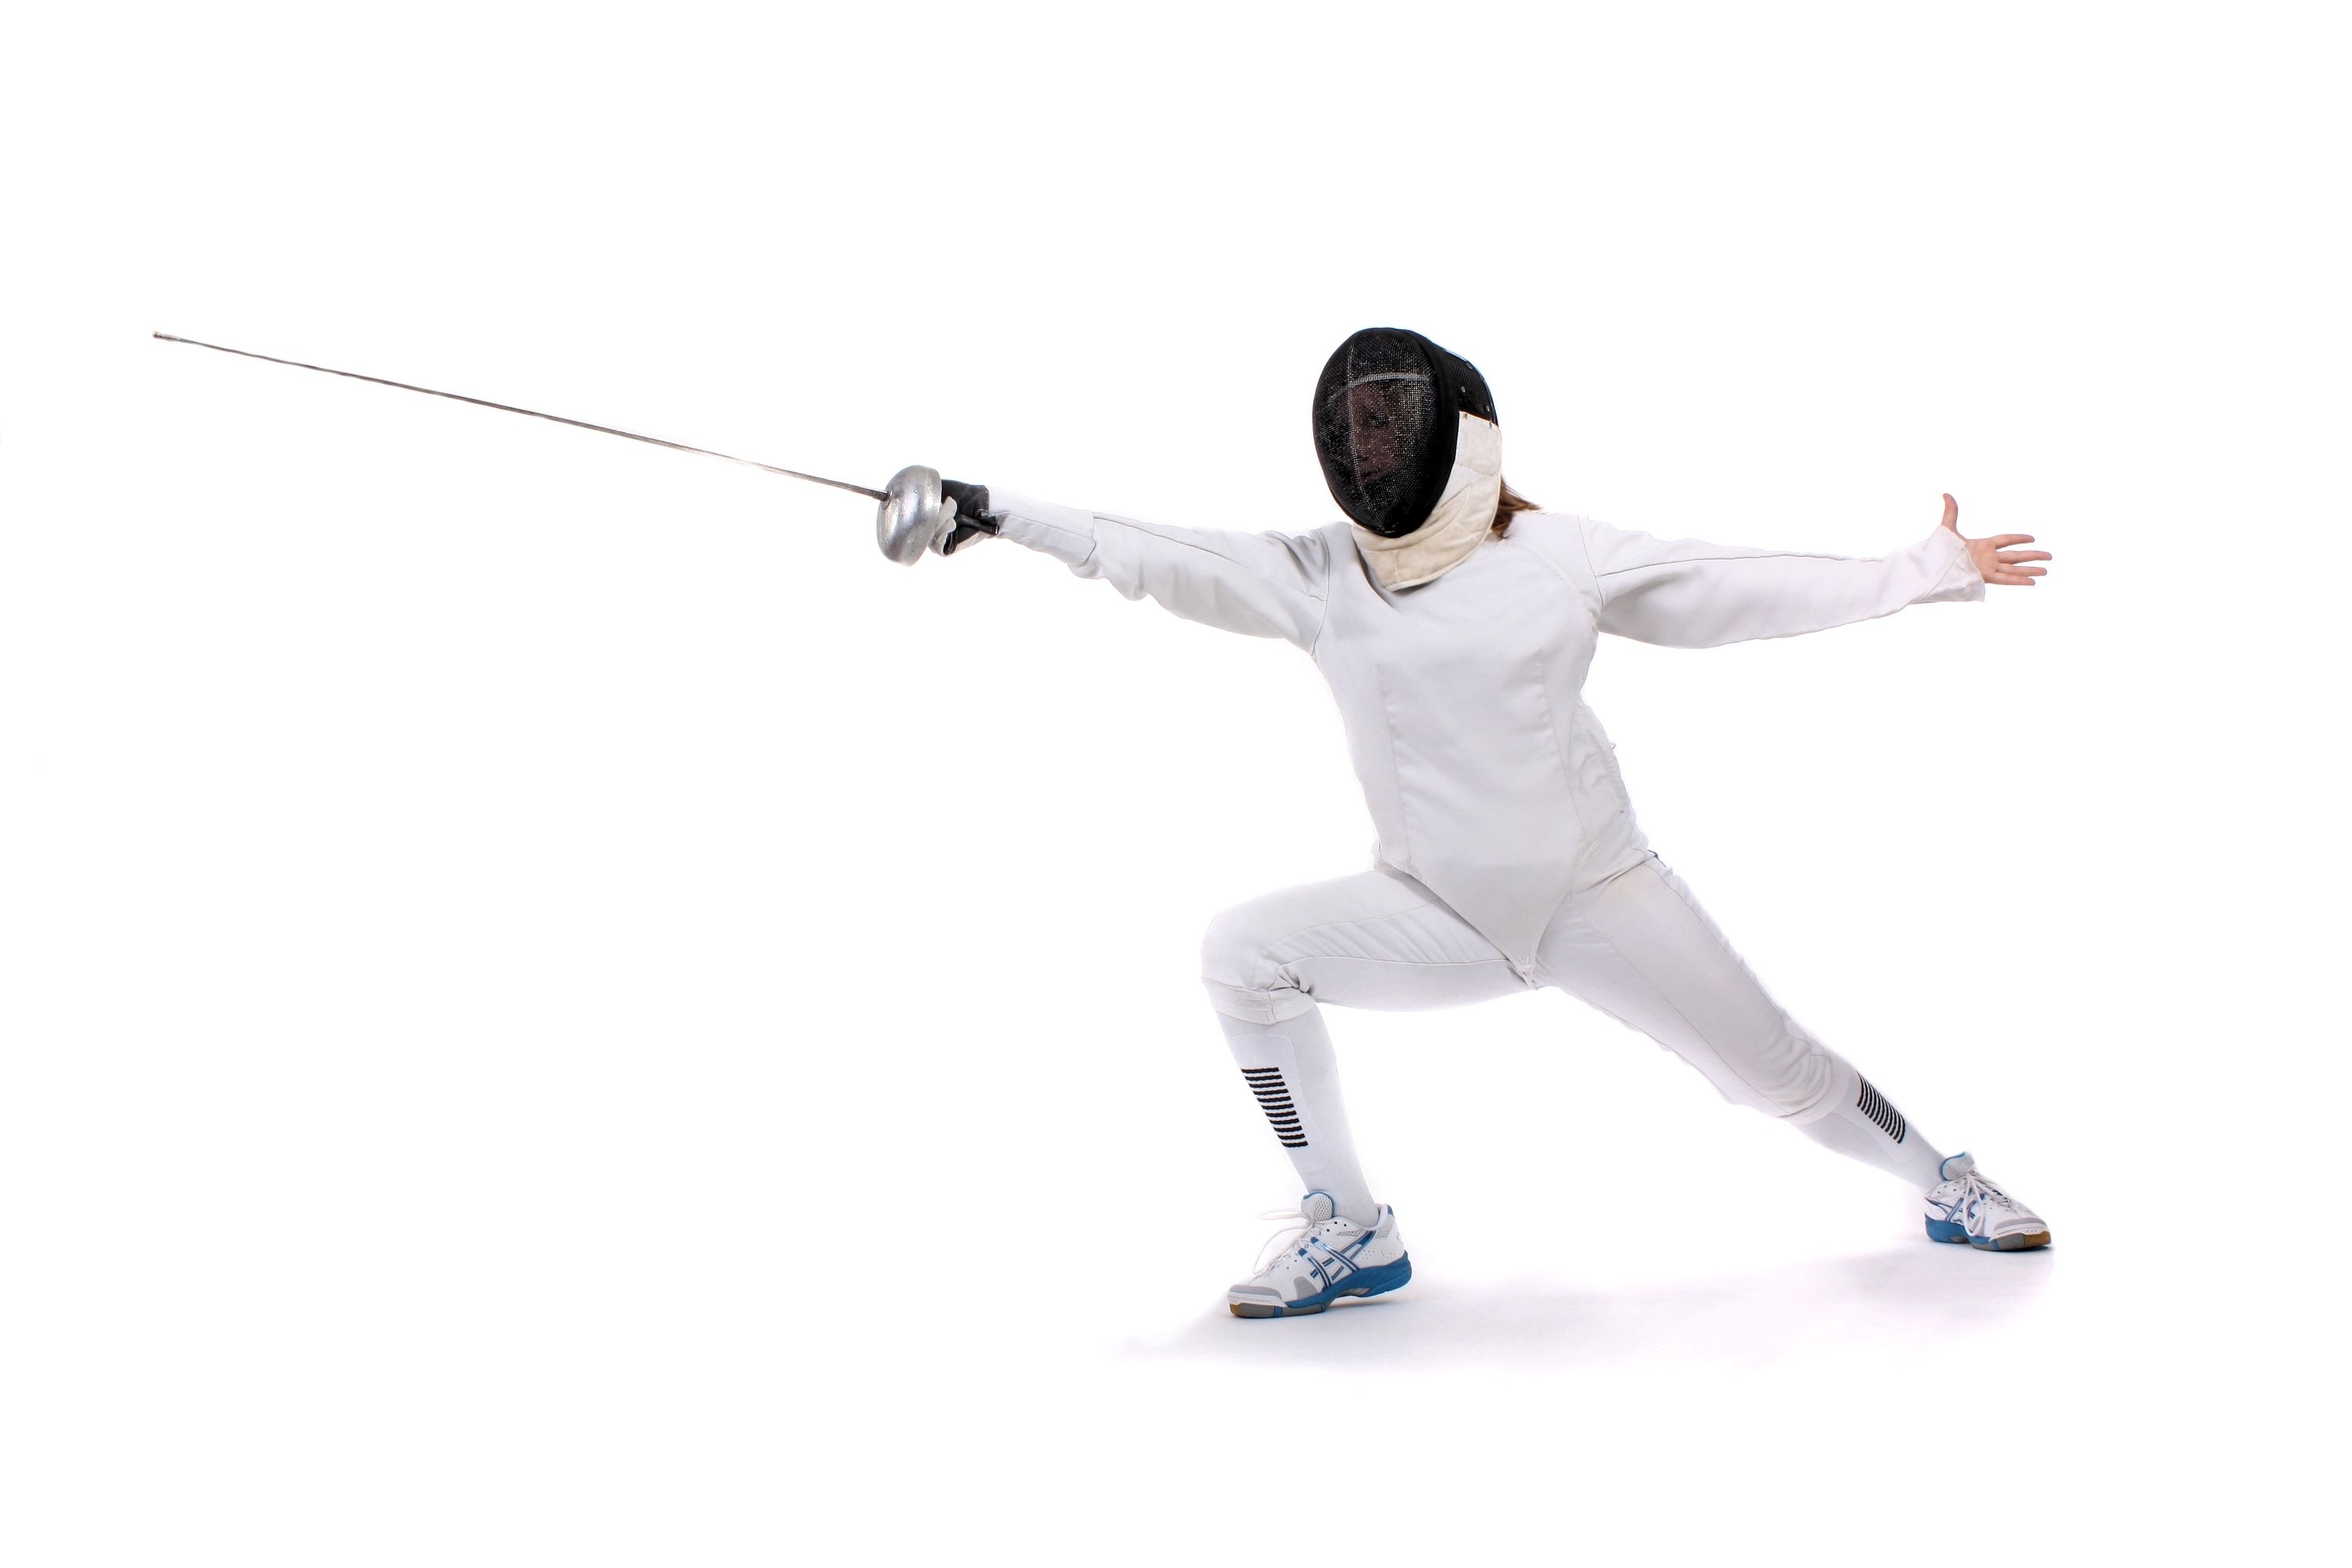 Fencing: A foil fencer, The athlete uses the most common type of weapon to practice. 3000x2000 HD Background.